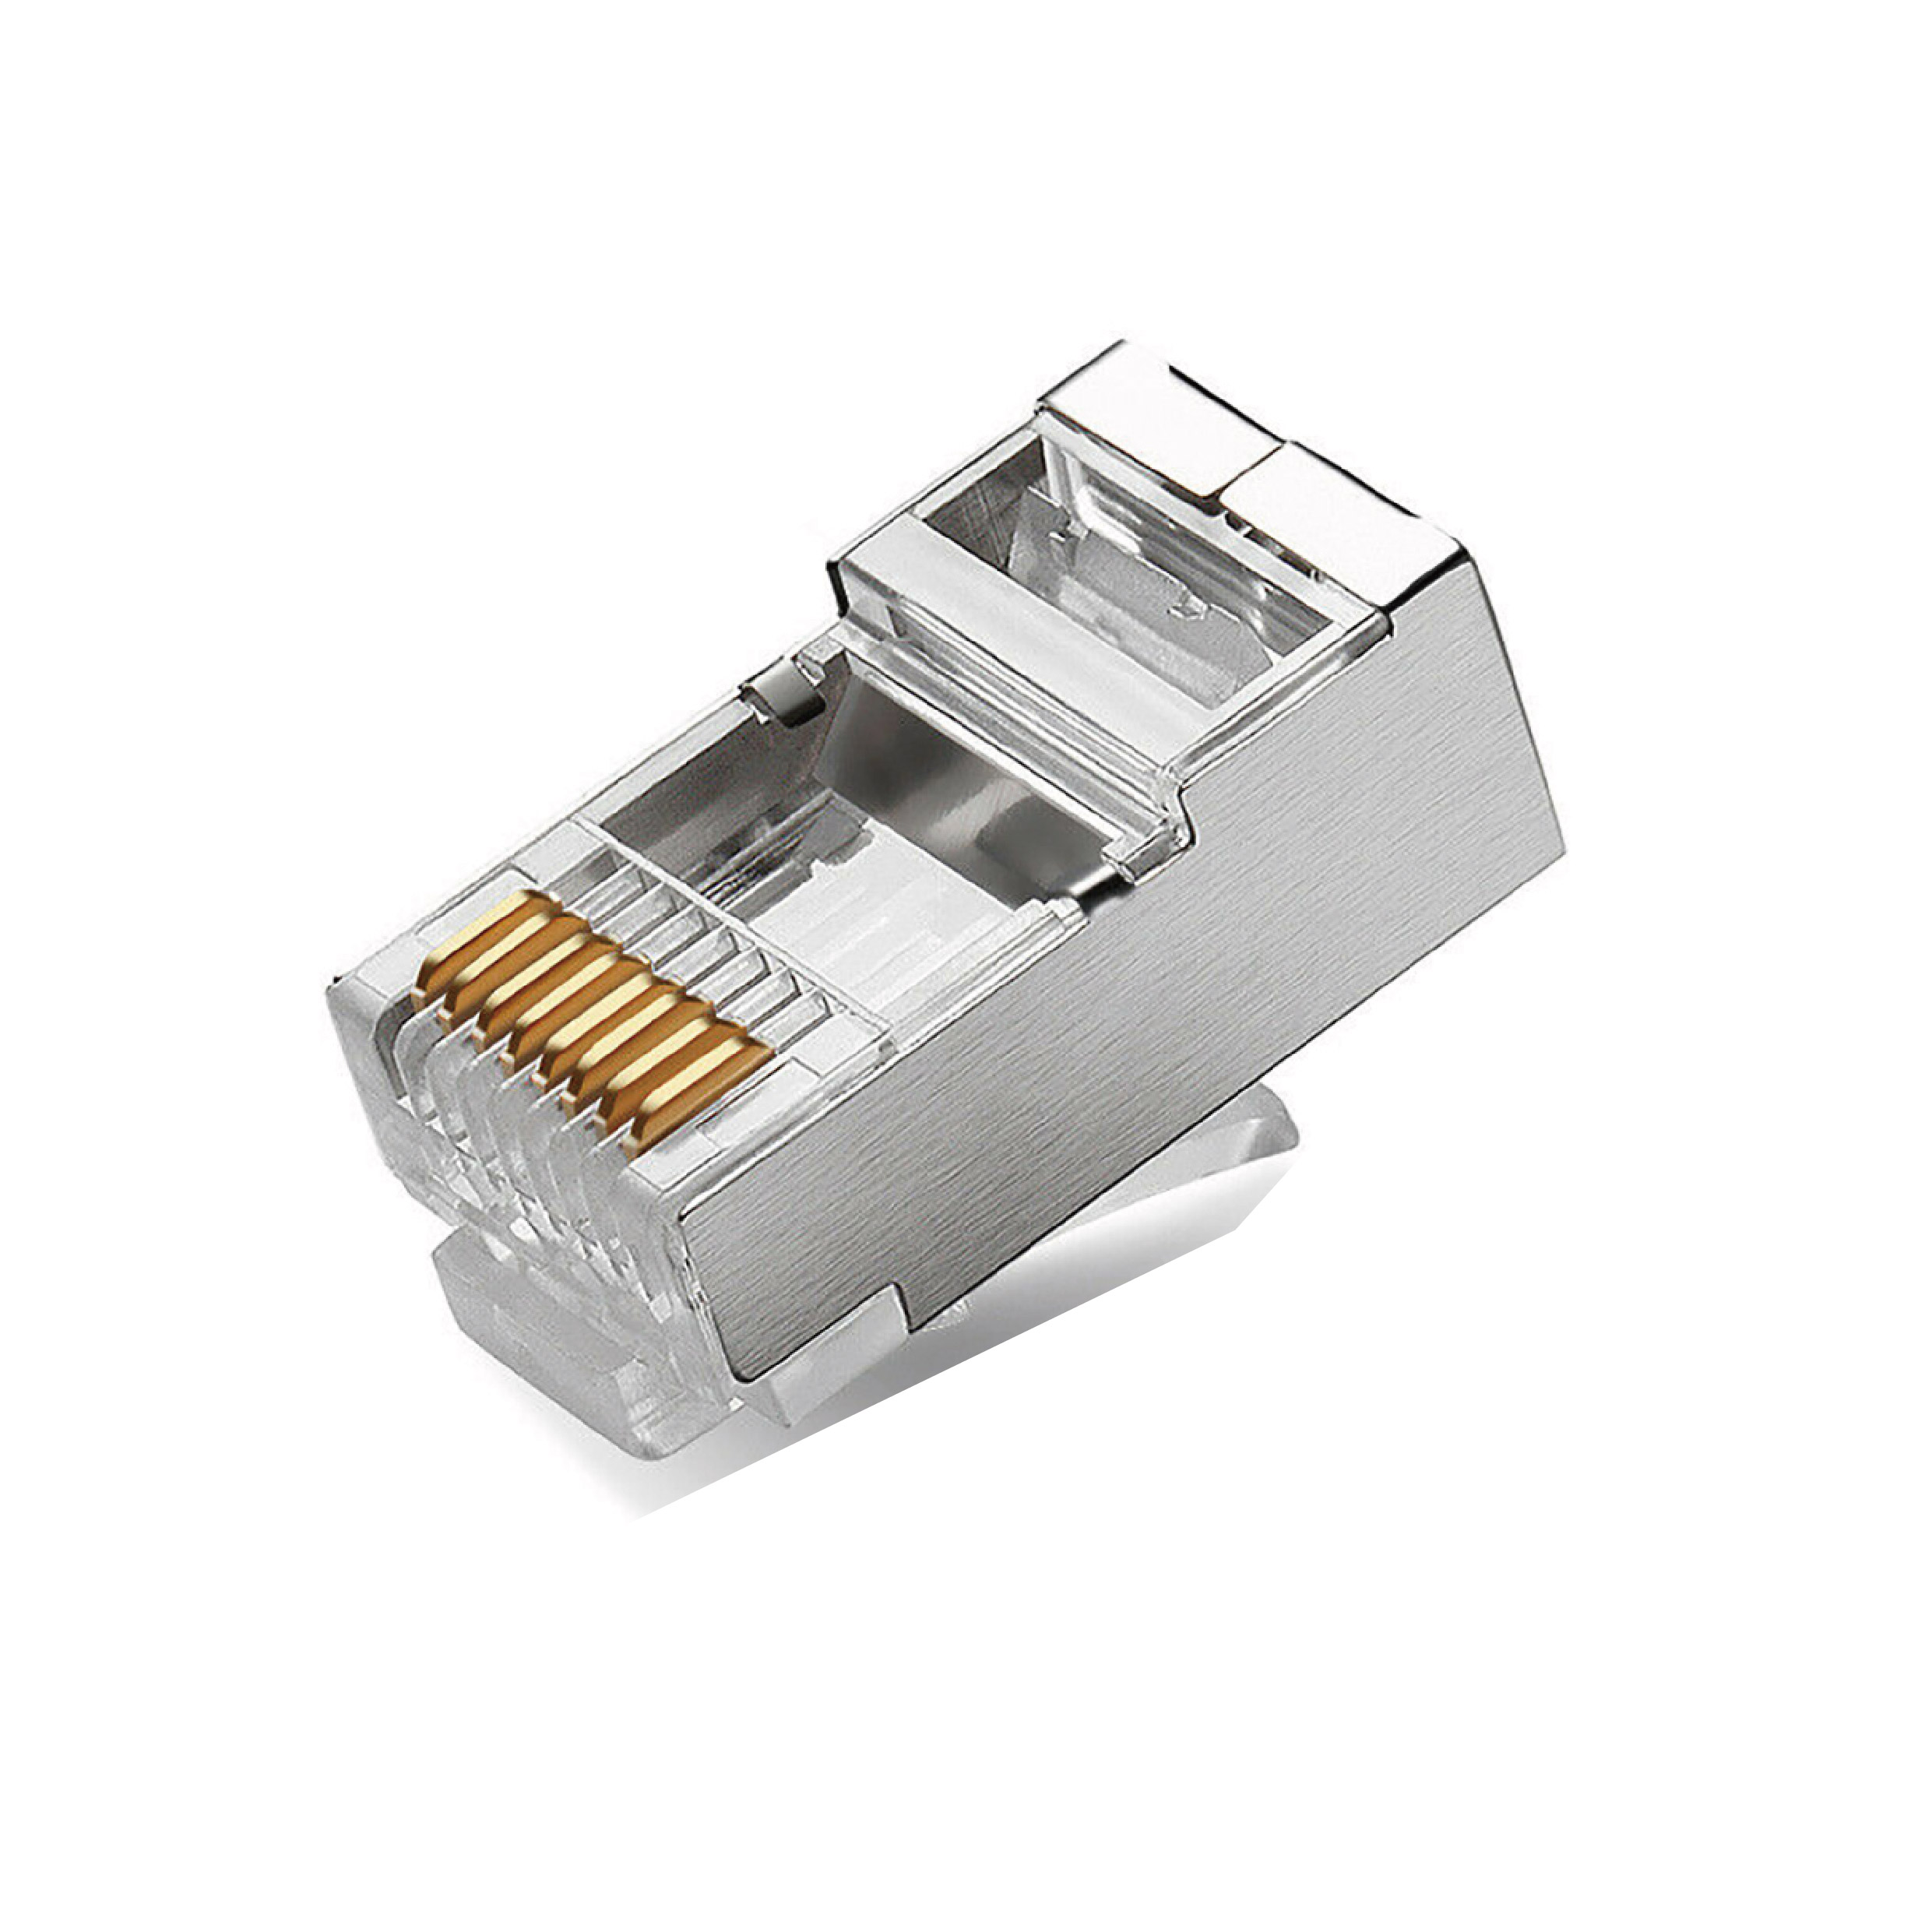 AMPLO CNT-C007 CAT6 RJ45 Metal Shielded Network Connector